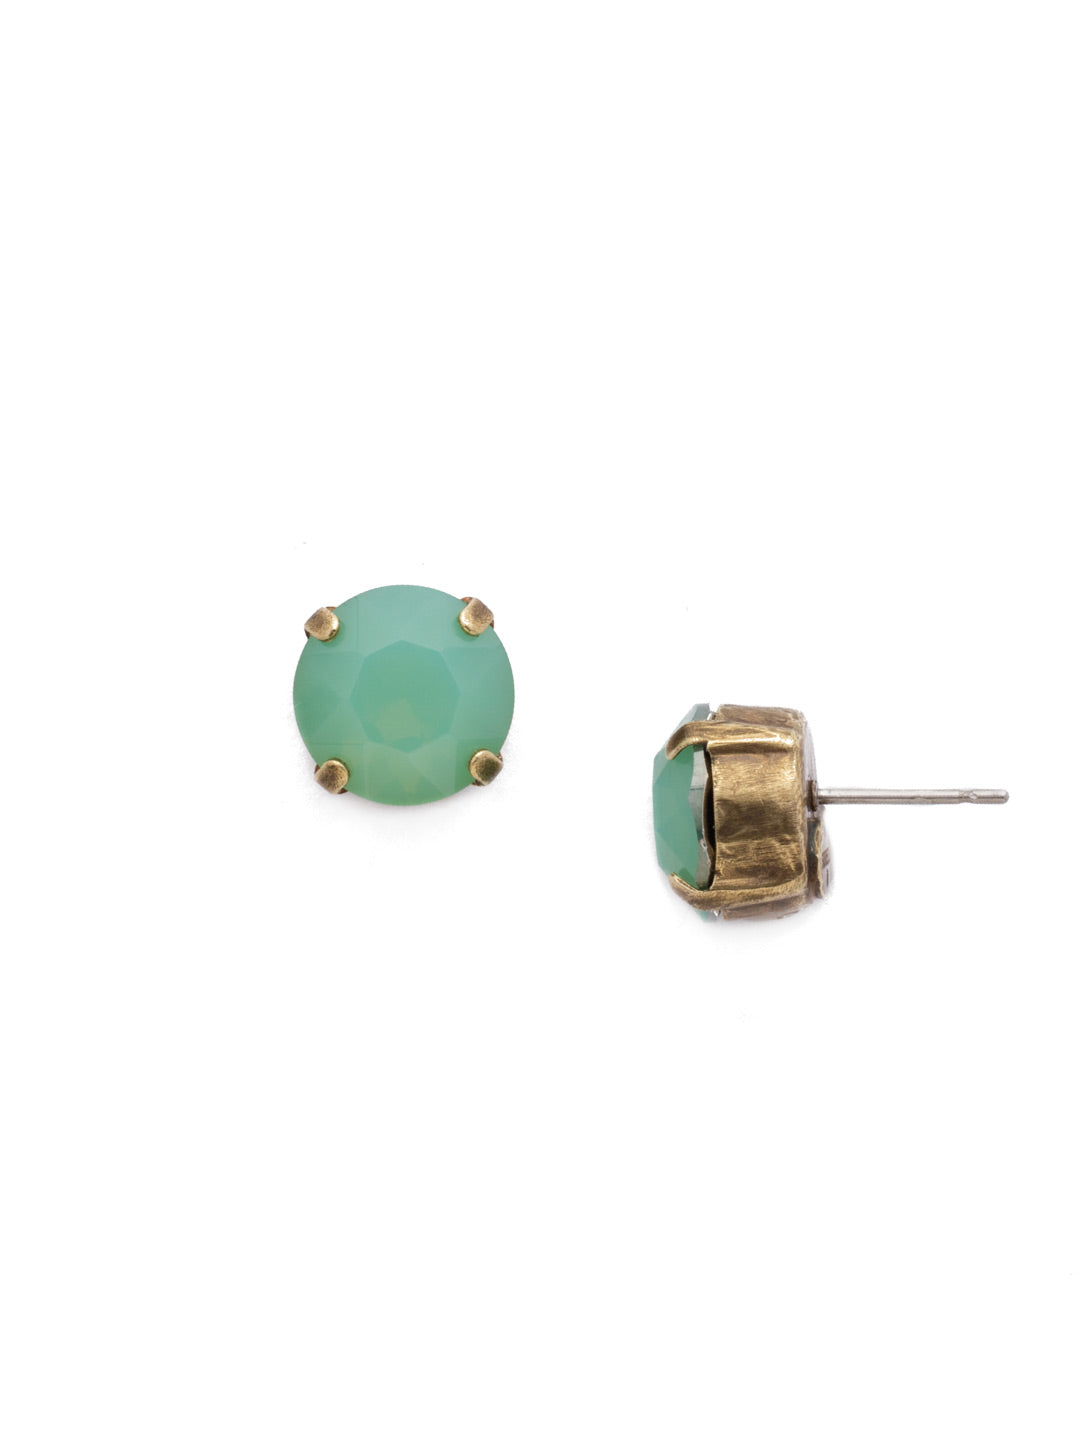 London Stud Earrings - ECM14AGPAC - <p>Everyone needs a great pair of studs. Add some classic sparkle to any occasion with these stud earrings. Need help picking a stud? <a href="https://www.sorrelli.com/blogs/sisterhood/round-stud-earrings-101-a-rundown-of-sizes-styles-and-sparkle">Check out our size guide!</a> From Sorrelli's Pacific Opal collection in our Antique Gold-tone finish.</p>